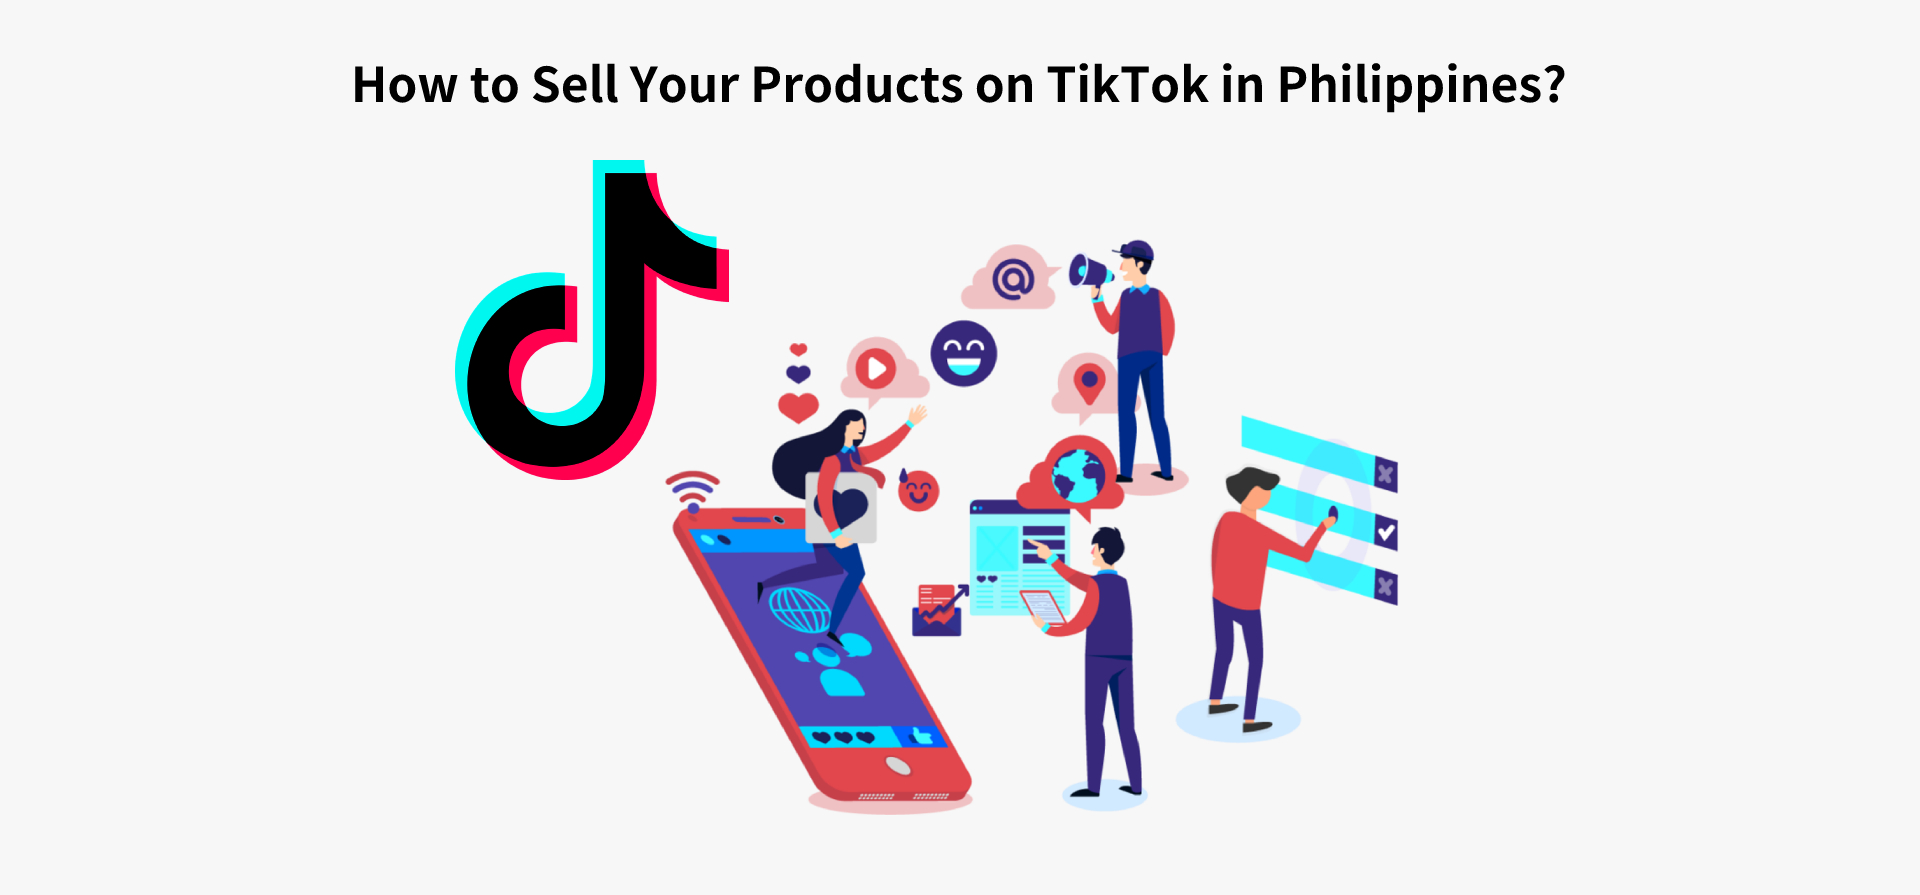 How to Sell Your Products on TikTok in Philippines?